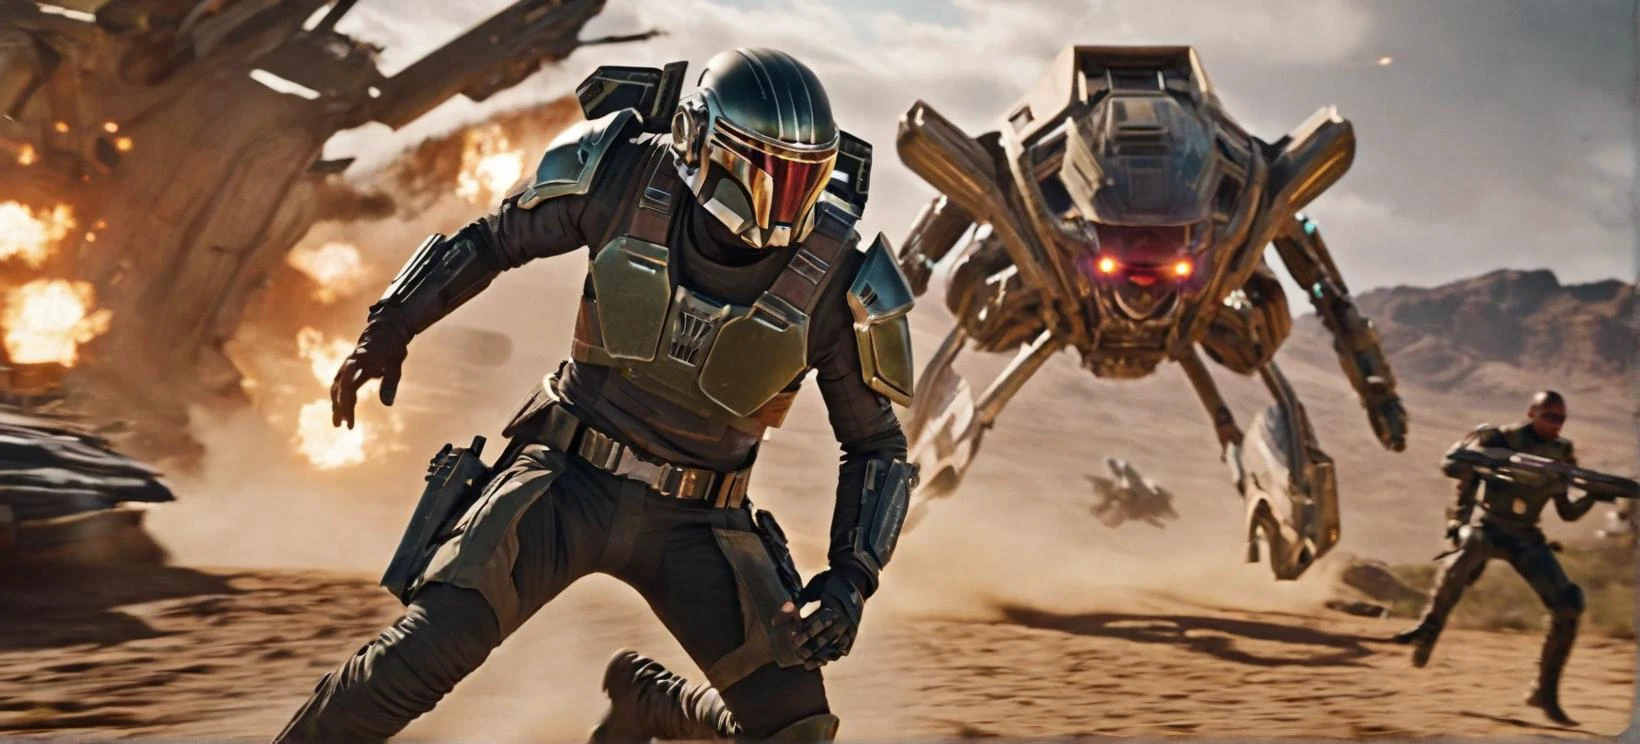 A high-speed, cinematic film still of an intergalactic bounty hunter in hot pursuit of their target, the frame alive with a kinetic, adrenaline-fueled energy as the two combatants weave through the hazardous terrain of an alien world.



